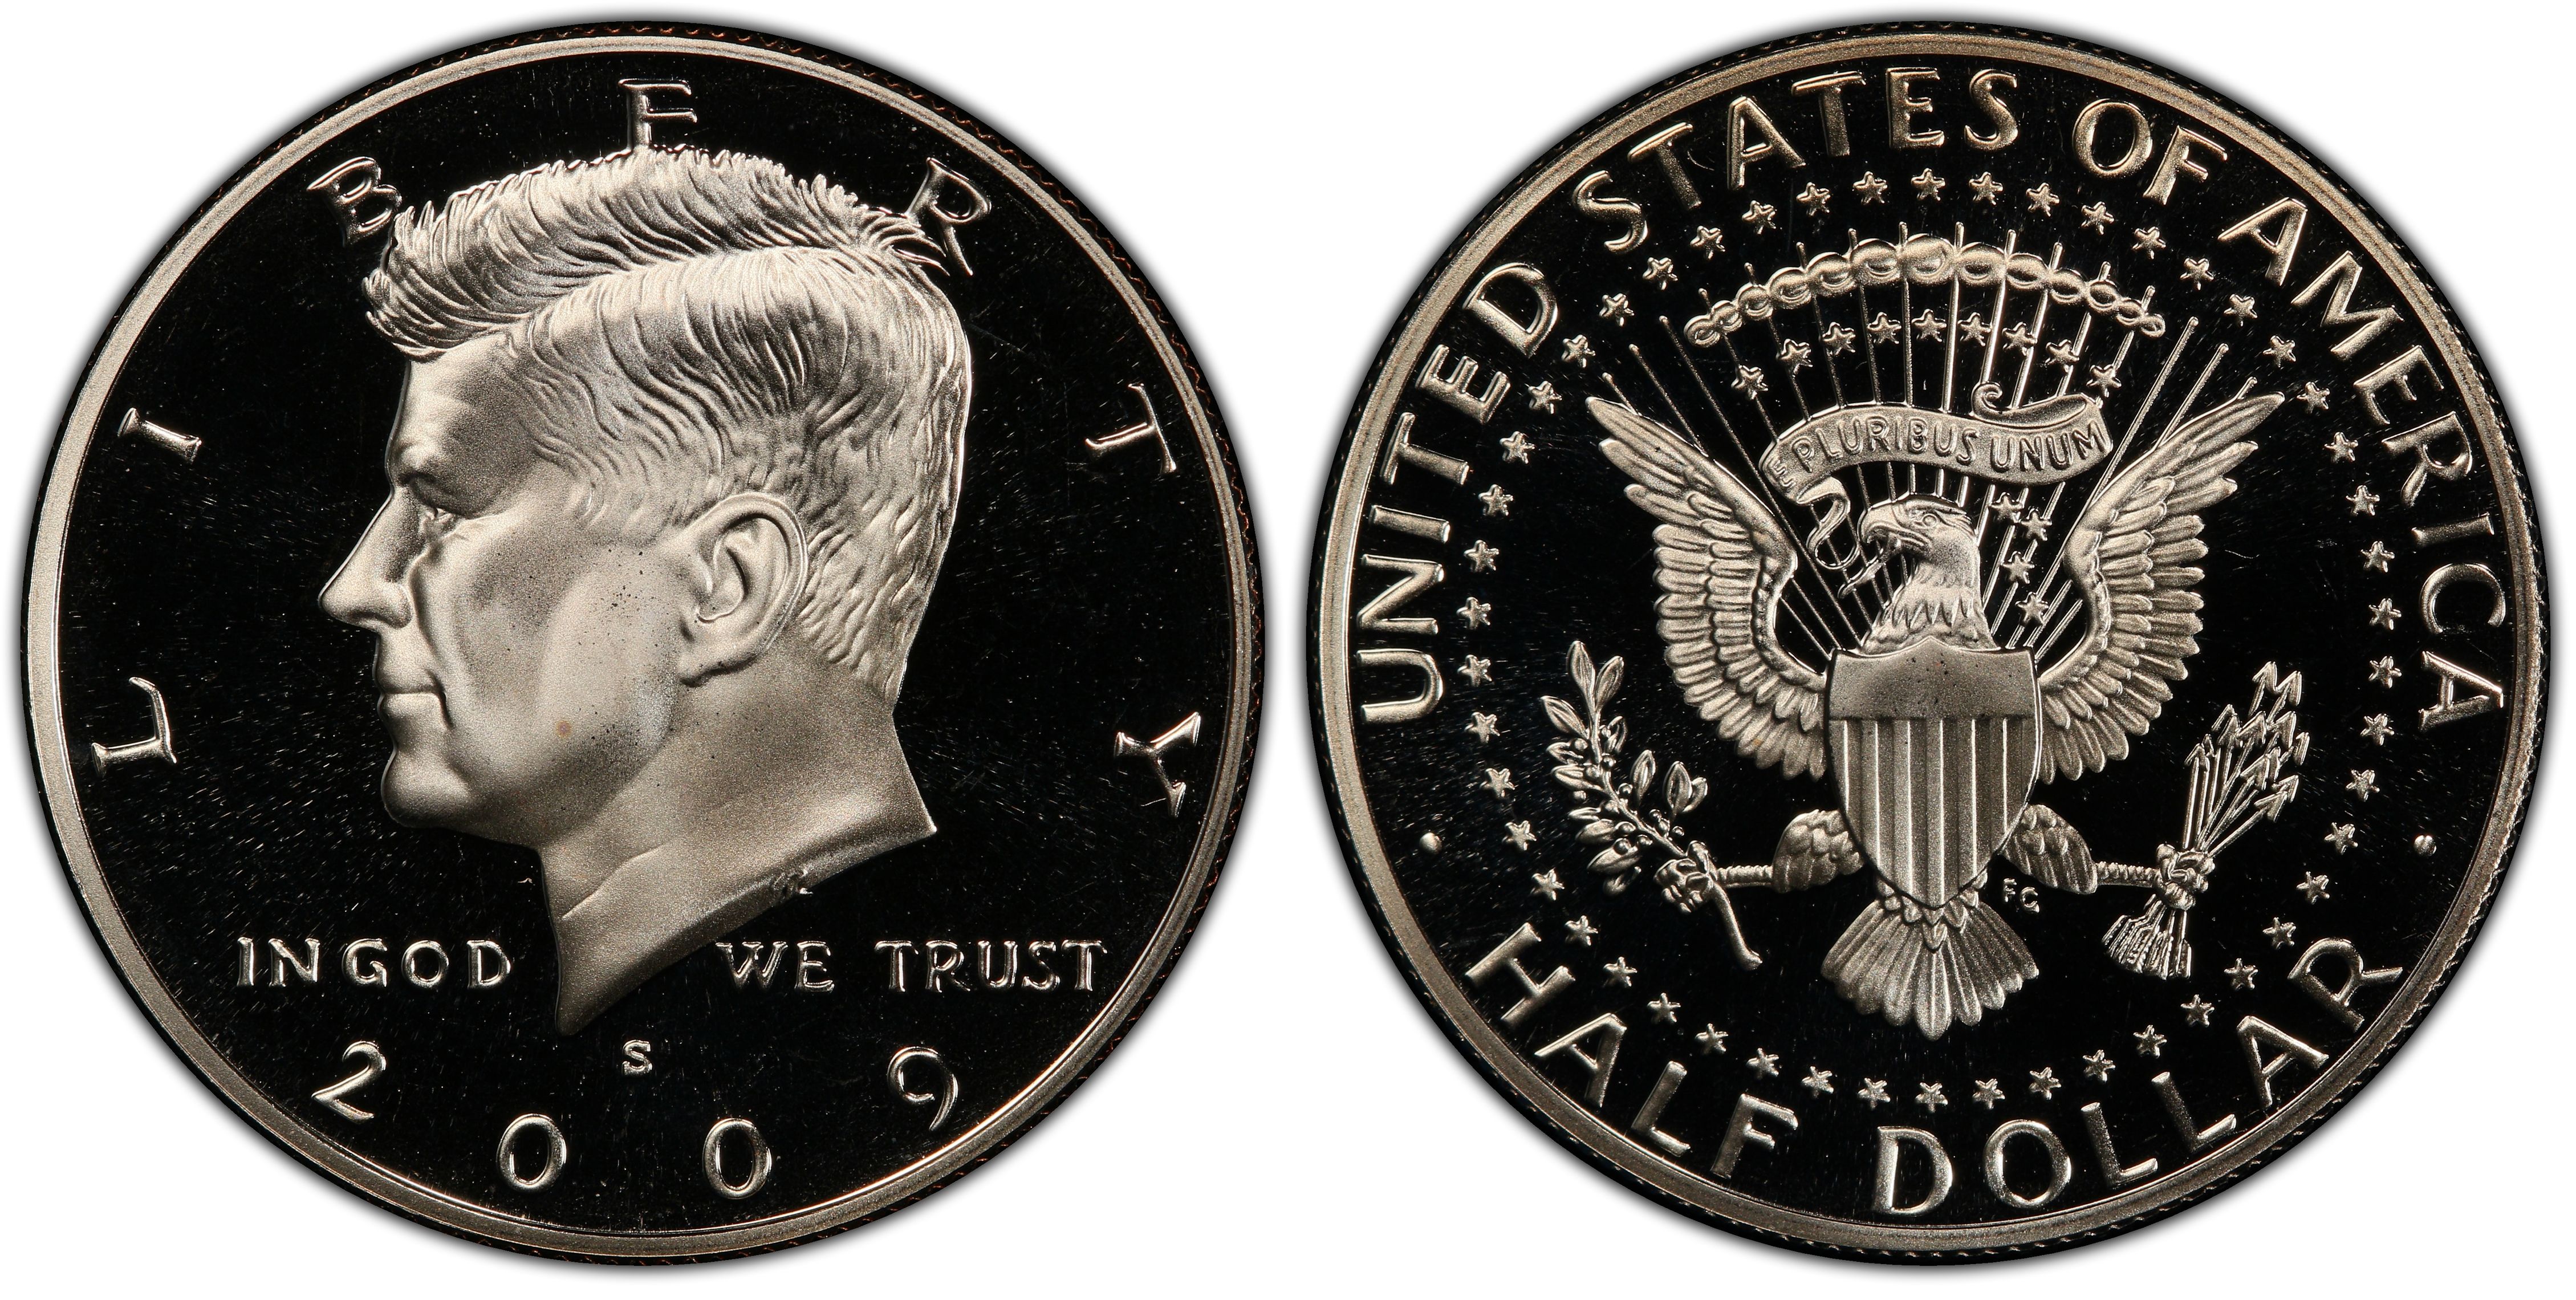 2009-S 50C, DCAM (Proof) Kennedy Half Dollar - PCGS CoinFacts